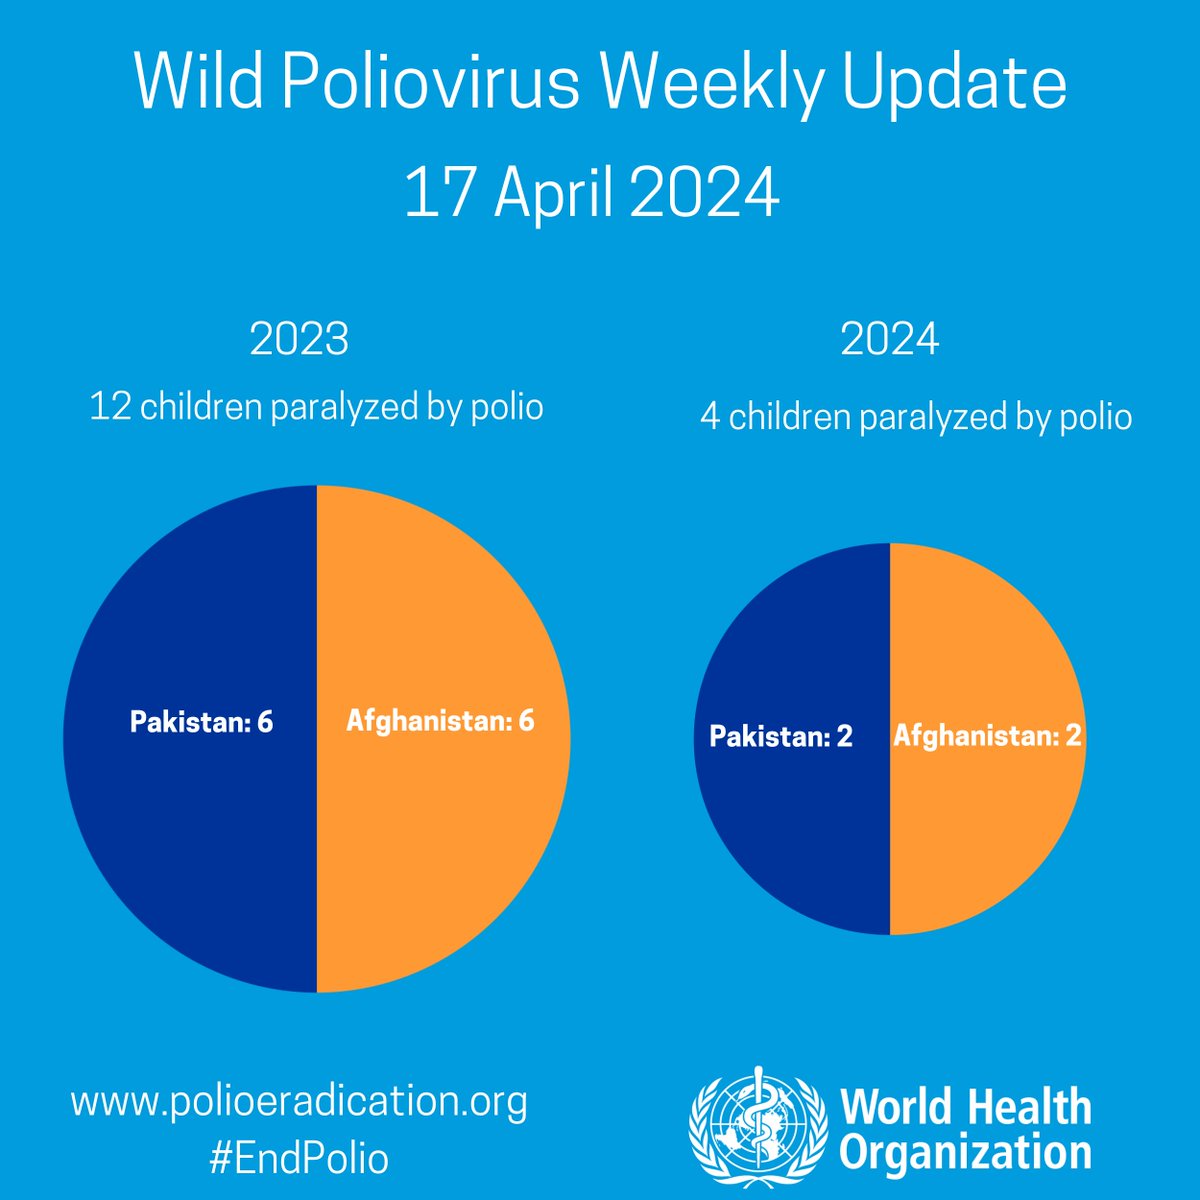 Wild poliovirus weekly case update from @WHO: No new cases.
In 2024: Afghanistan: 2; Pakistan: 2
In 2023: Afghanistan: 6; Pakistan: 6.
bit.ly/3MnsSxA. #EndPolio.